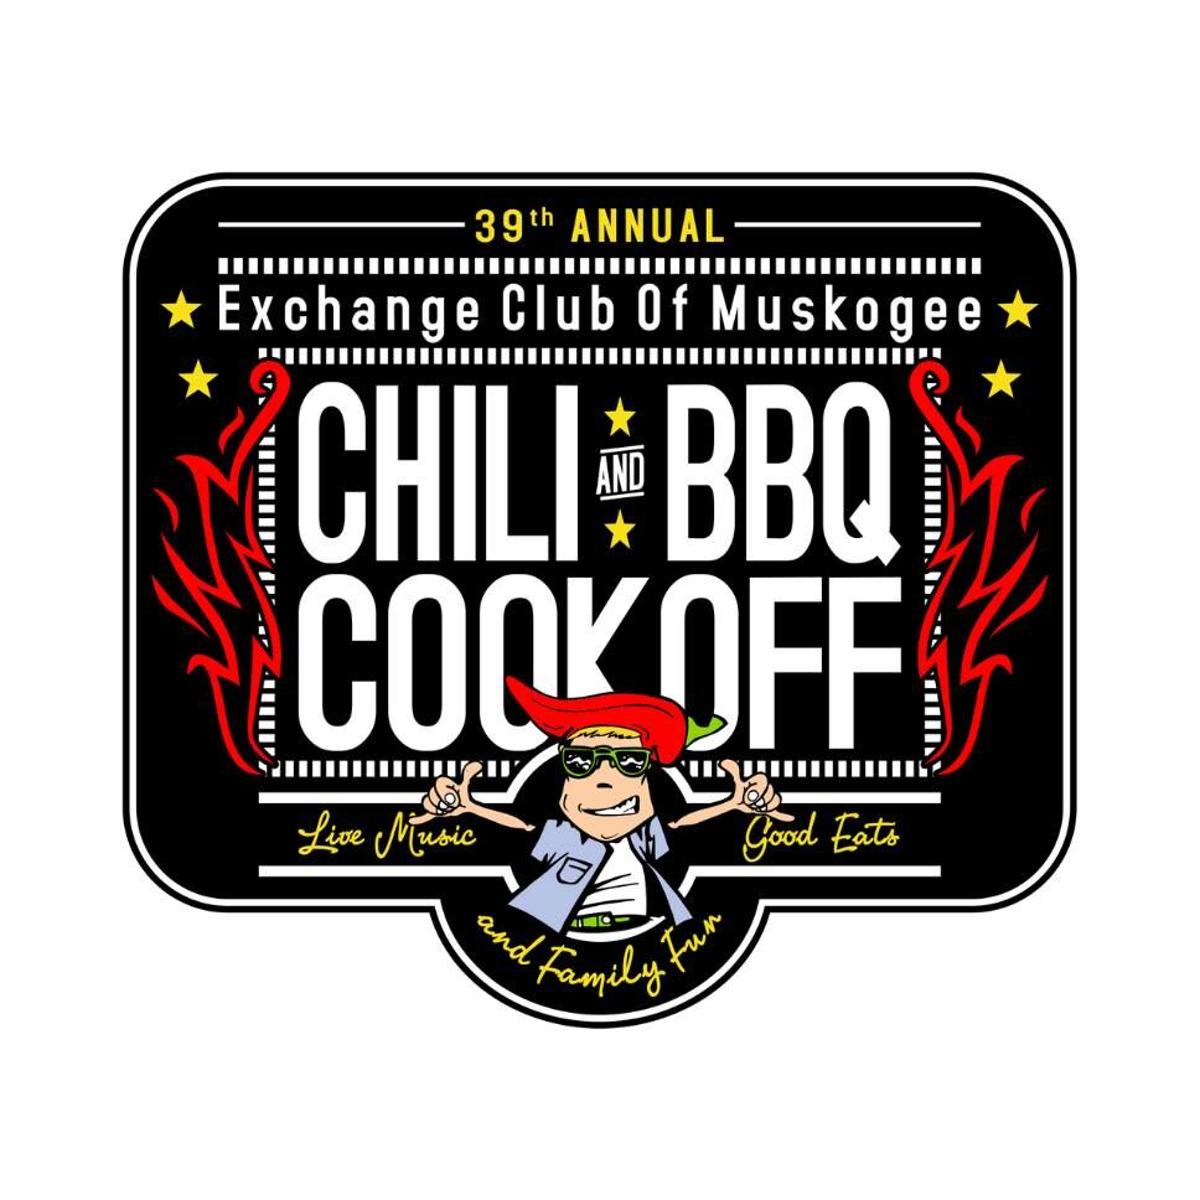 bbq cook off